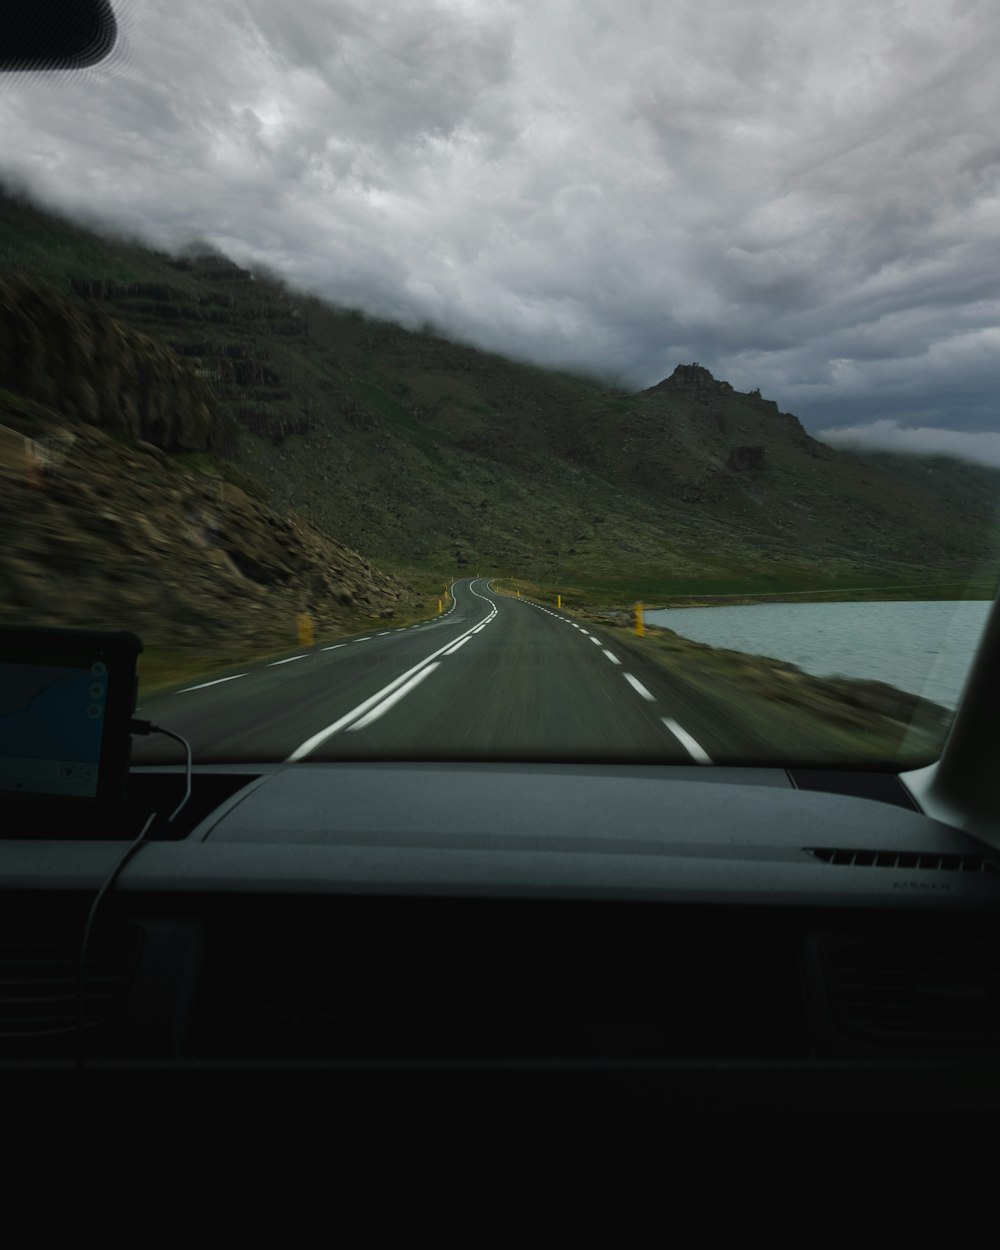 a road with a body of water and mountains in the background